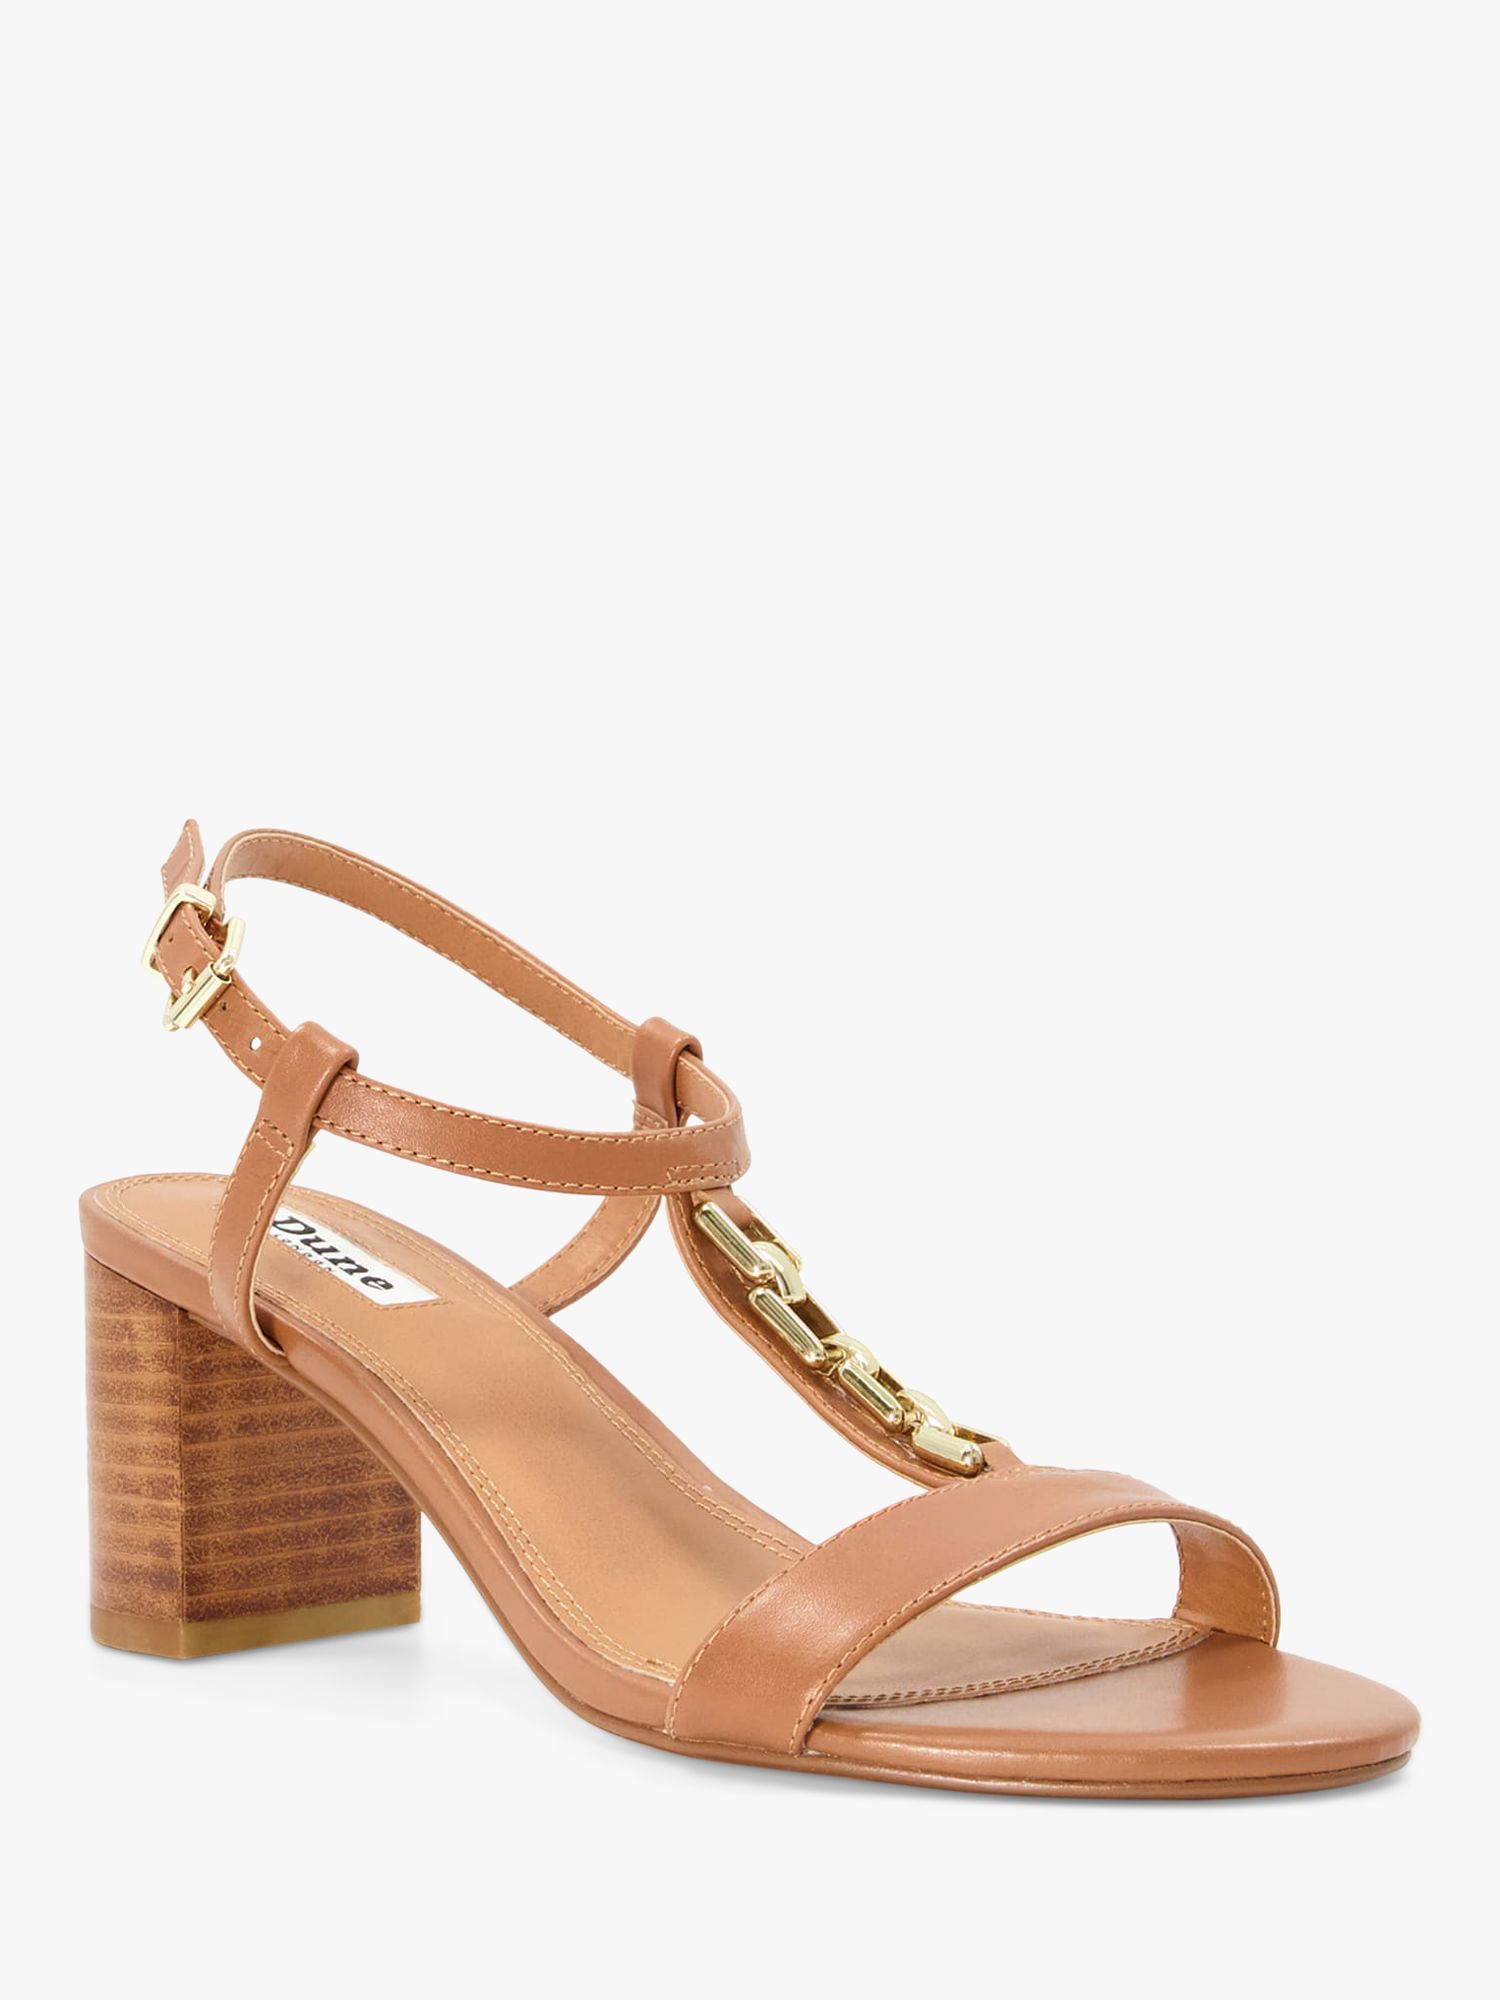 Buy Dune Just Leather Chain Detail Sandals Online at johnlewis.com